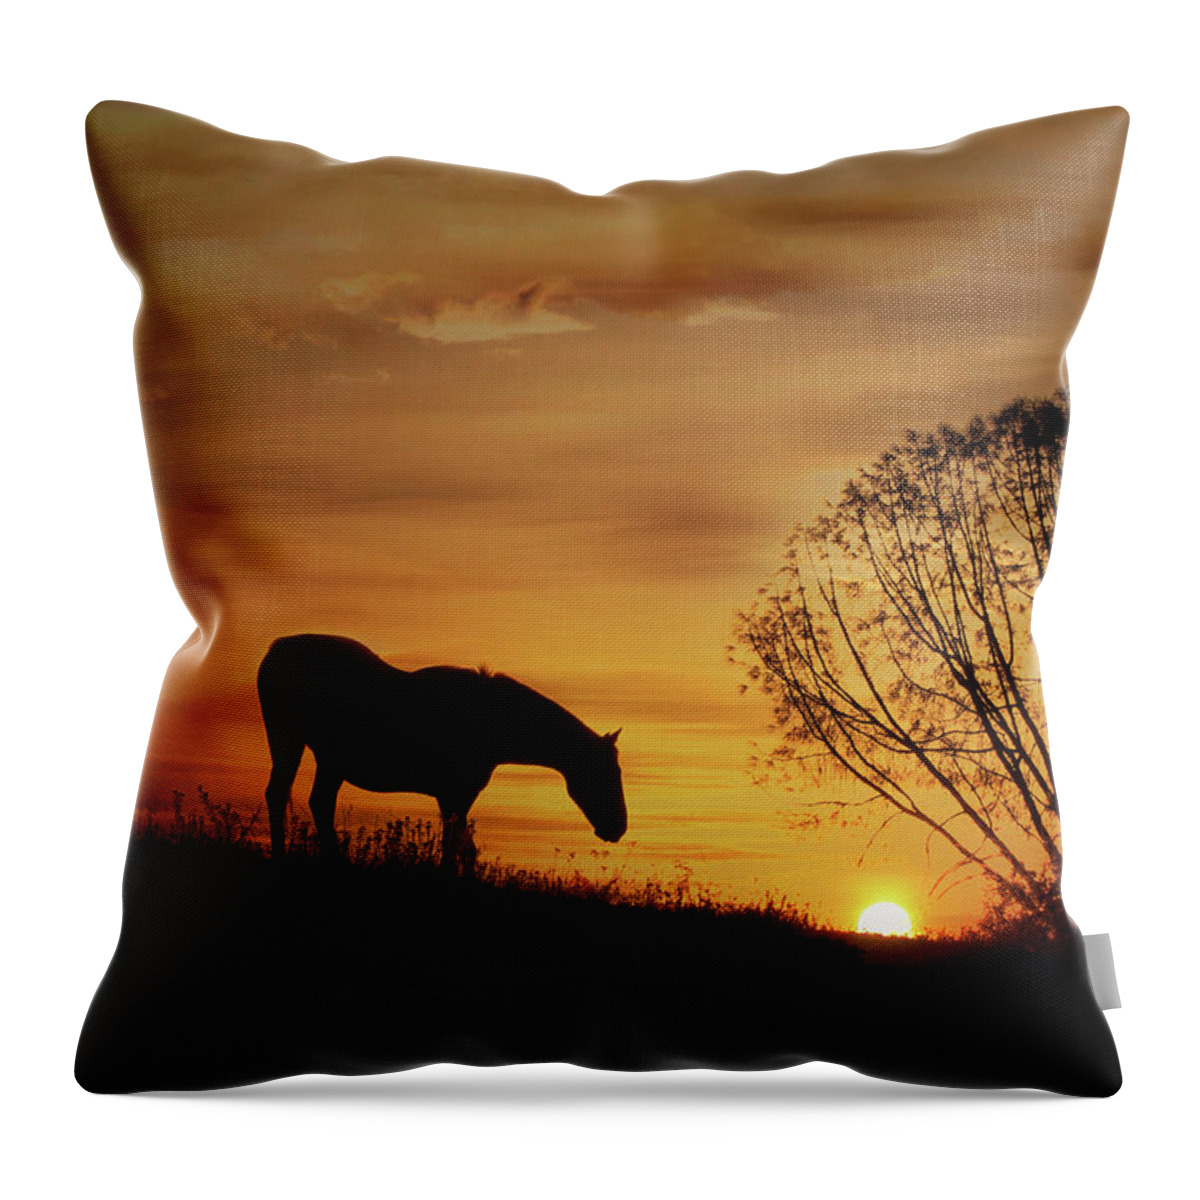 Horse Throw Pillow featuring the photograph Southwestern Horse Sunset by Stephanie Laird